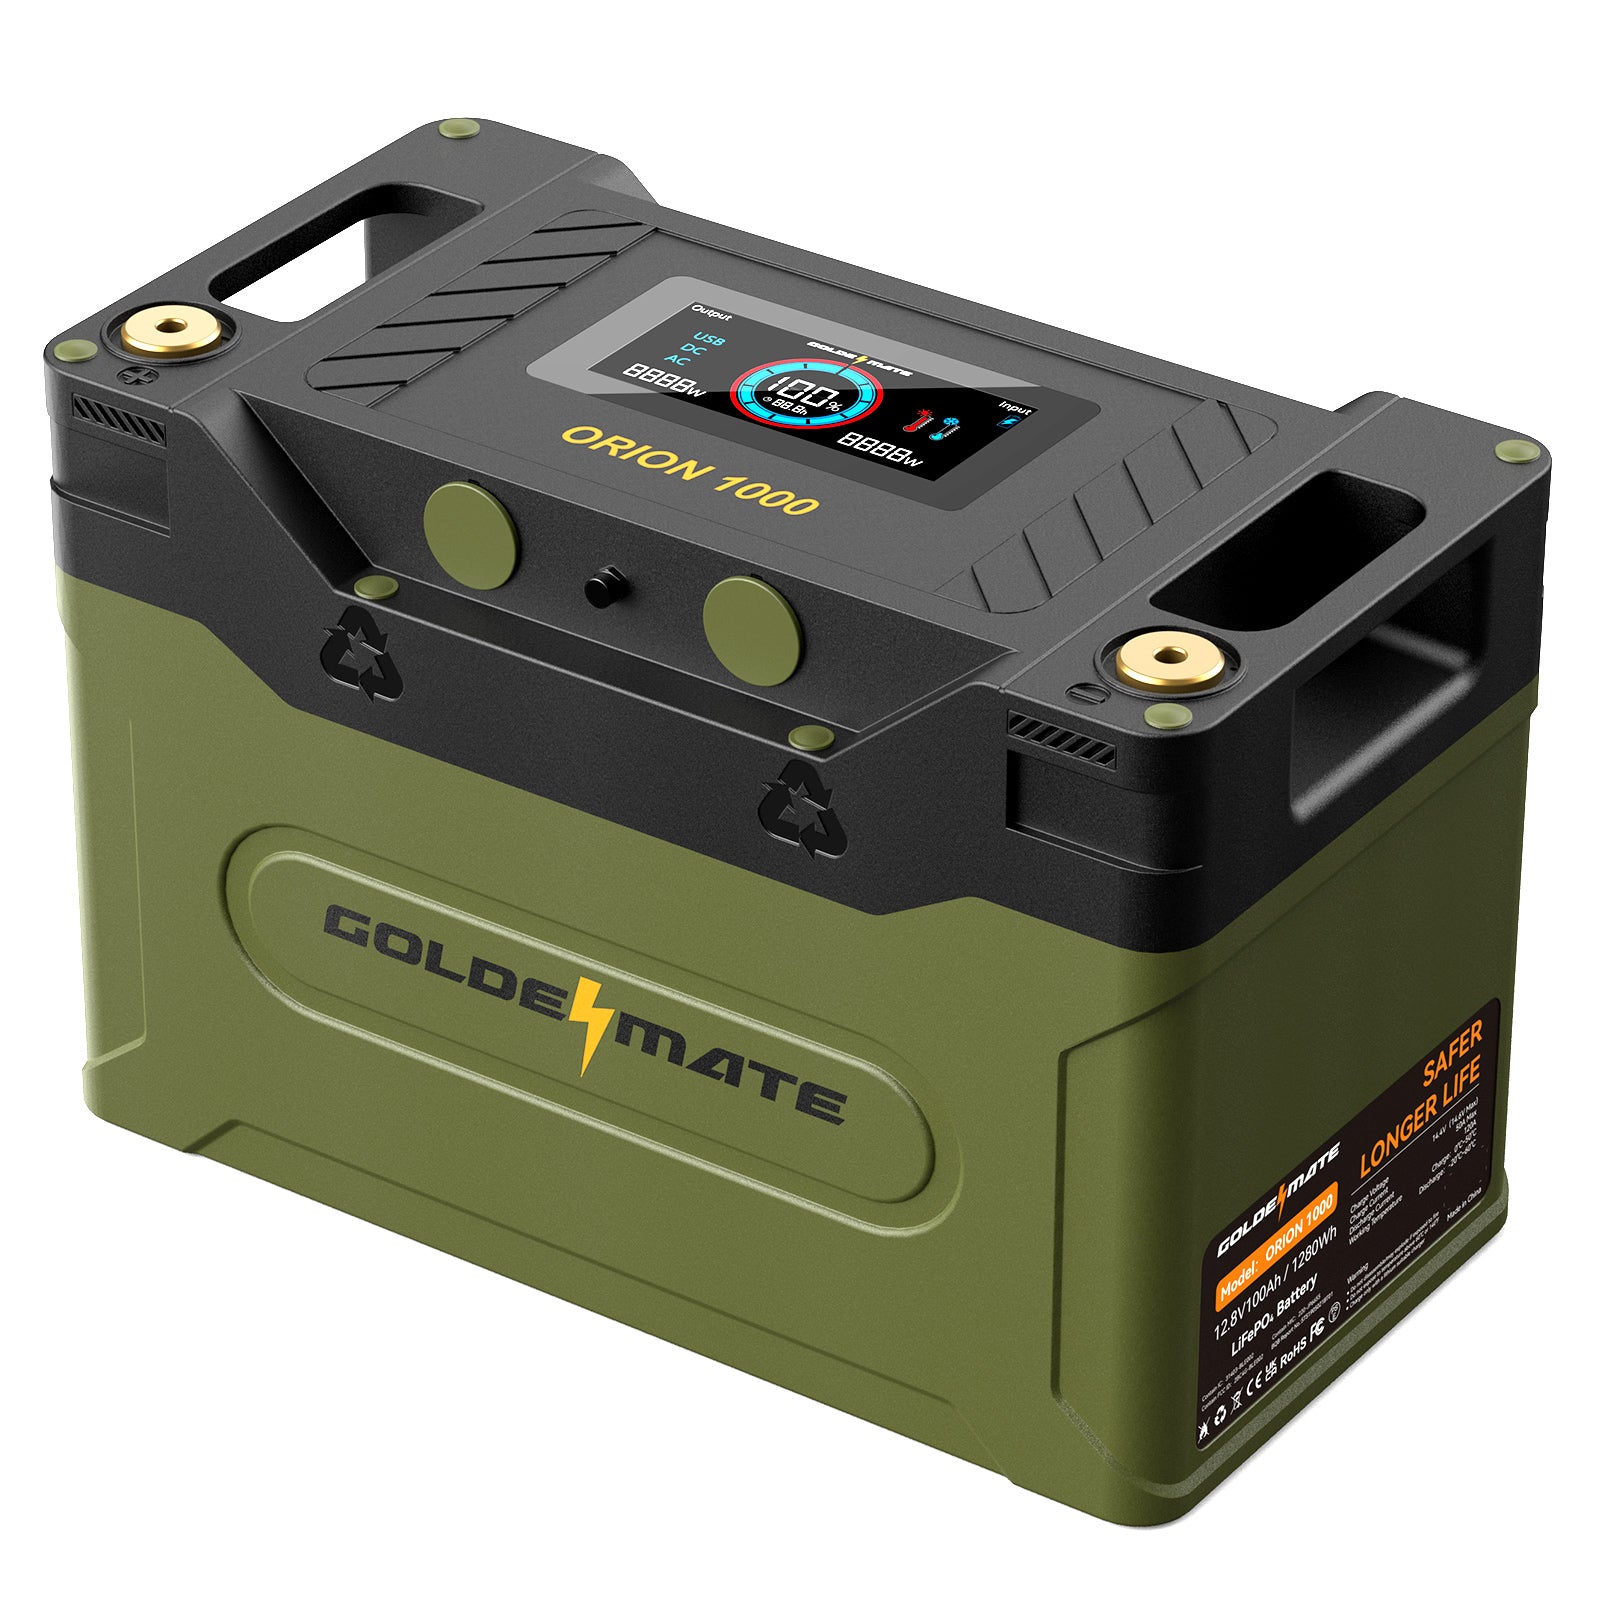 GoldenMate Orion 1000 12V 100Ah Group 31 Smart LiFePO4 Battery with Battery Monitor - 1280Wh Energy